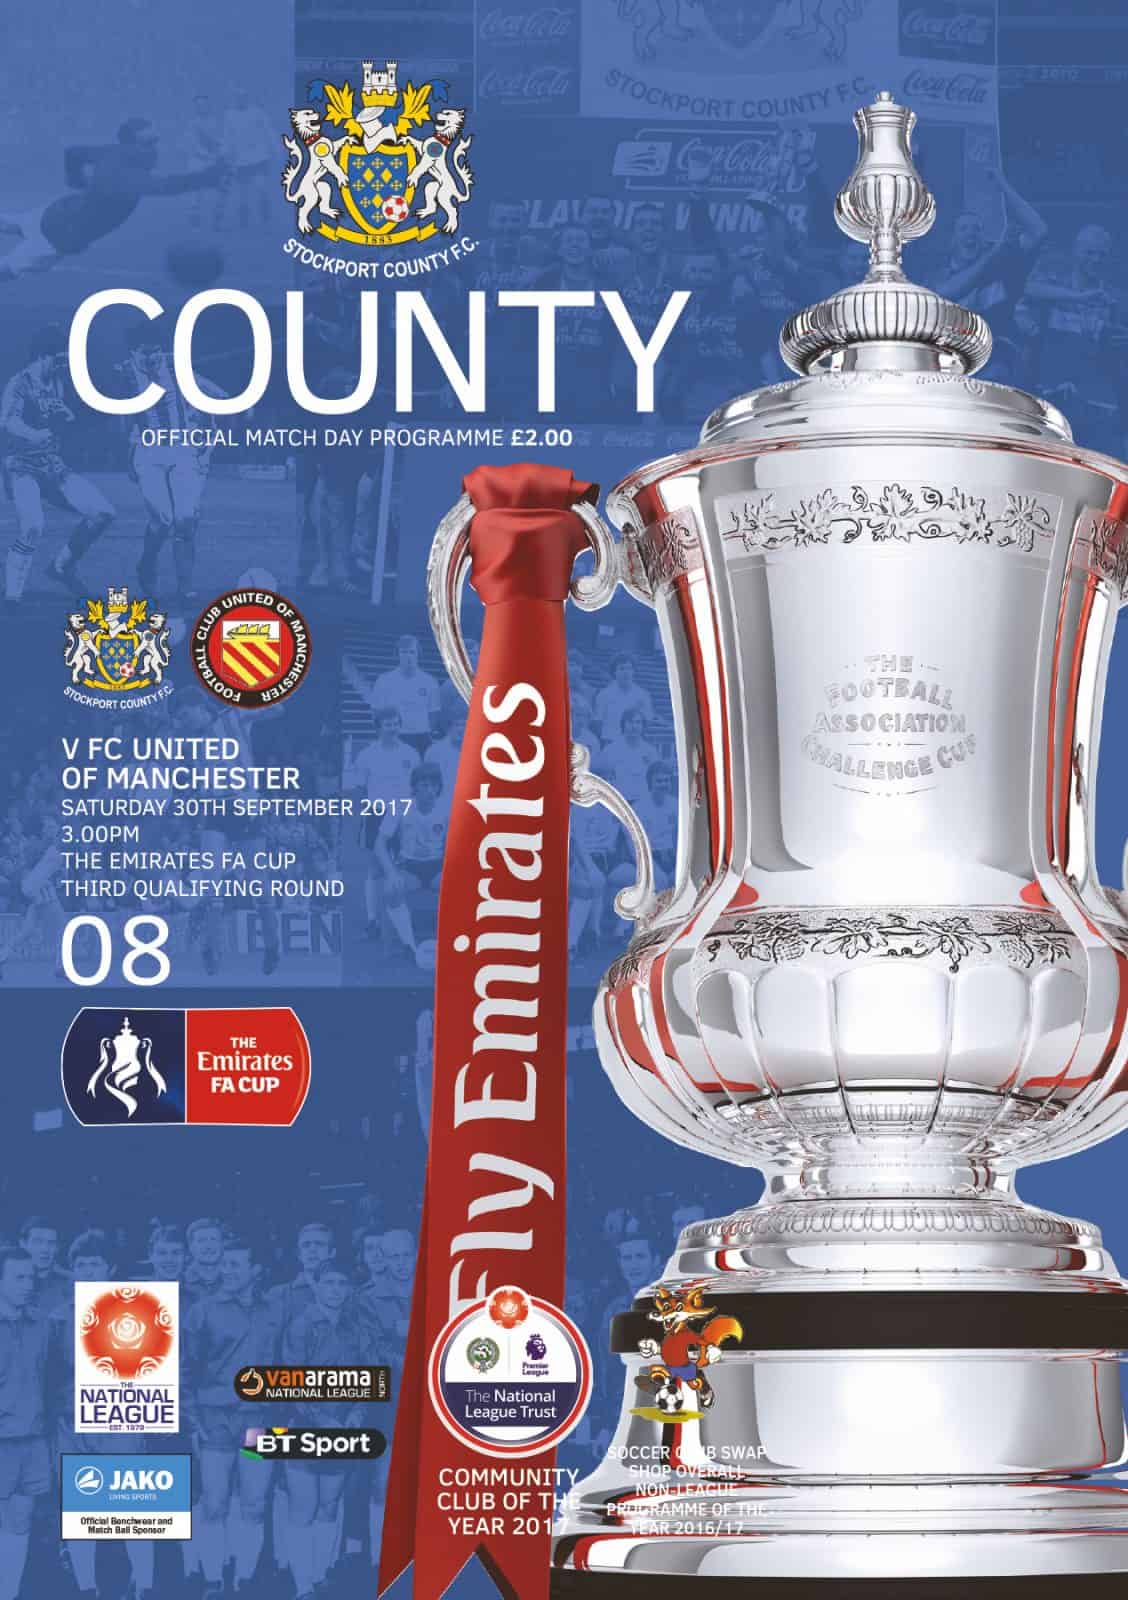 In your award-winning matchday programme today - Stockport County